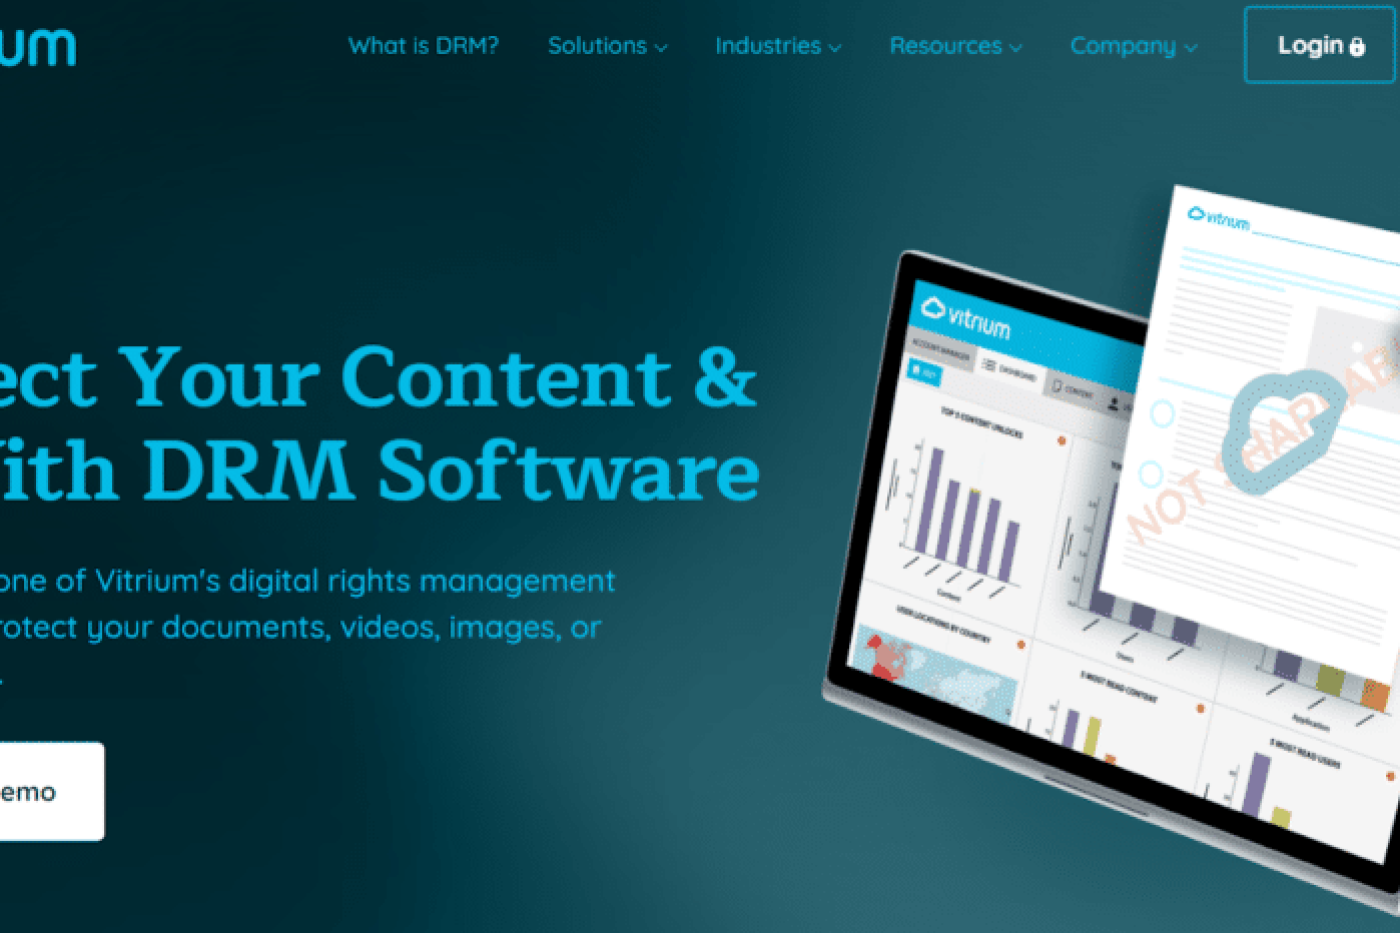 Vitrium: Is It The Best Digital Rights Management Software For Protecting Content?